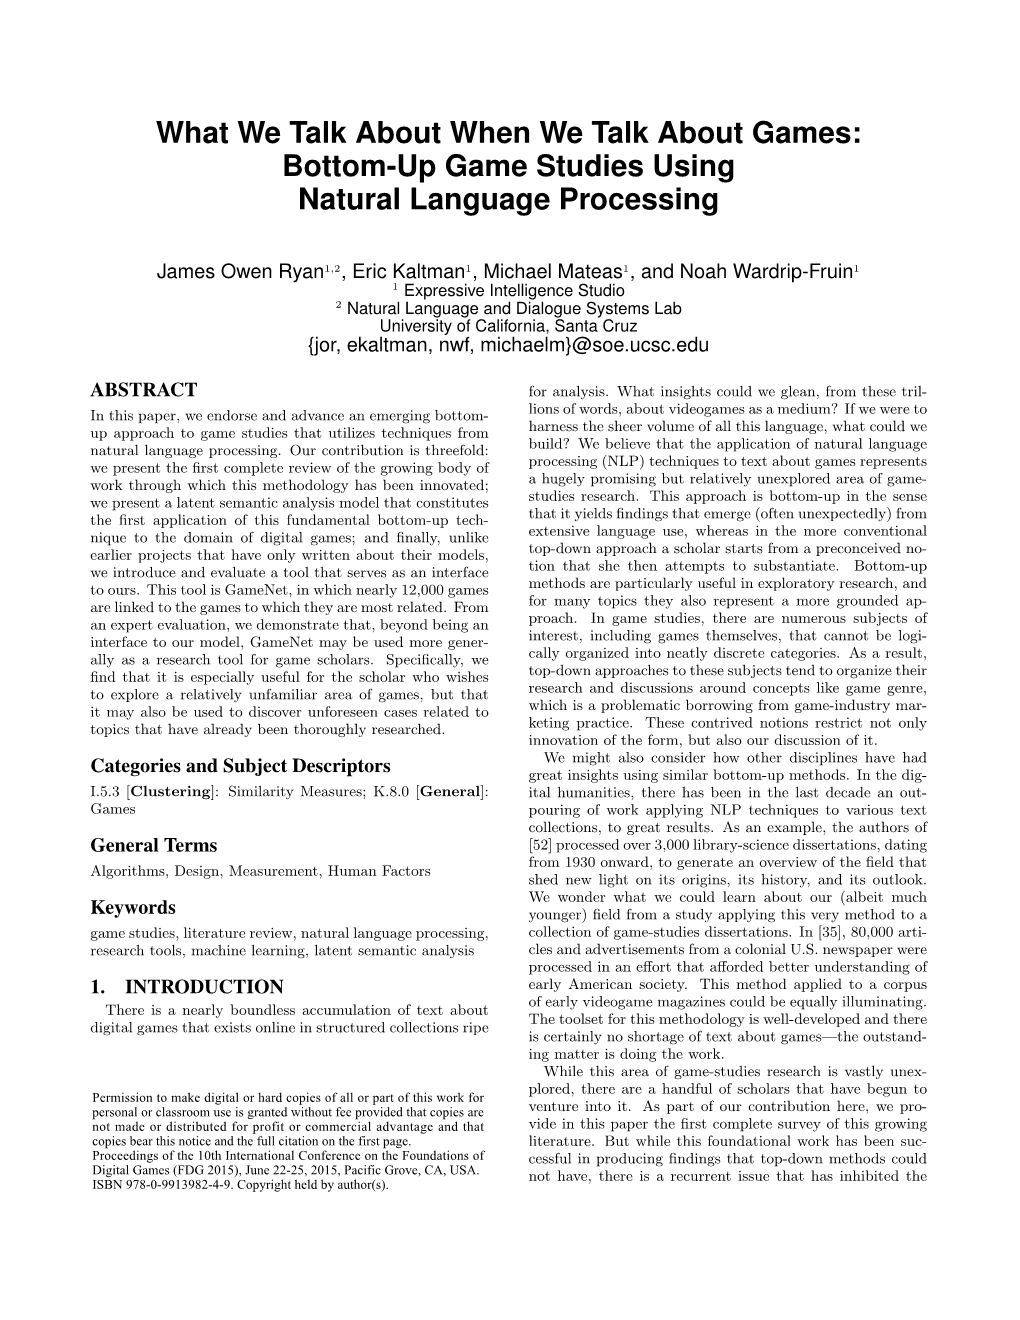 What We Talk About When We Talk About Games: Bottom-Up Game Studies Using Natural Language Processing